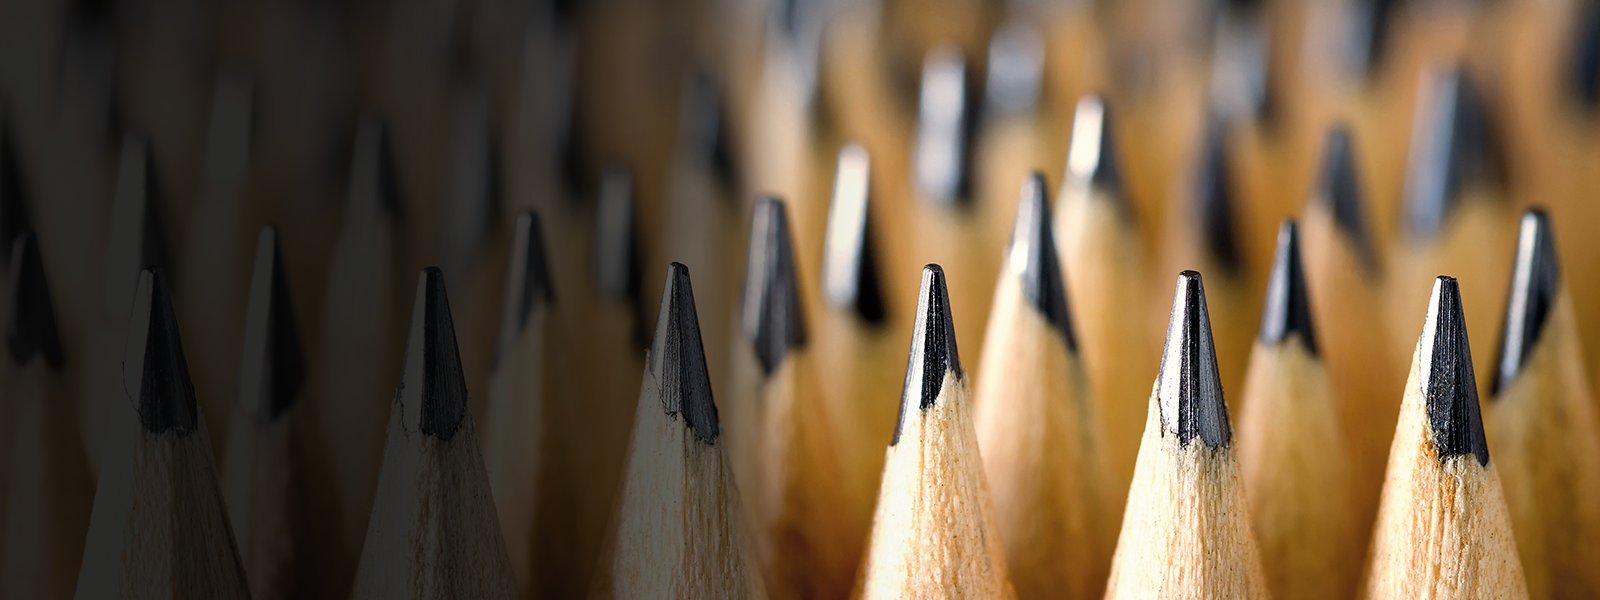 Close up image of rows of sharpened pencil tips